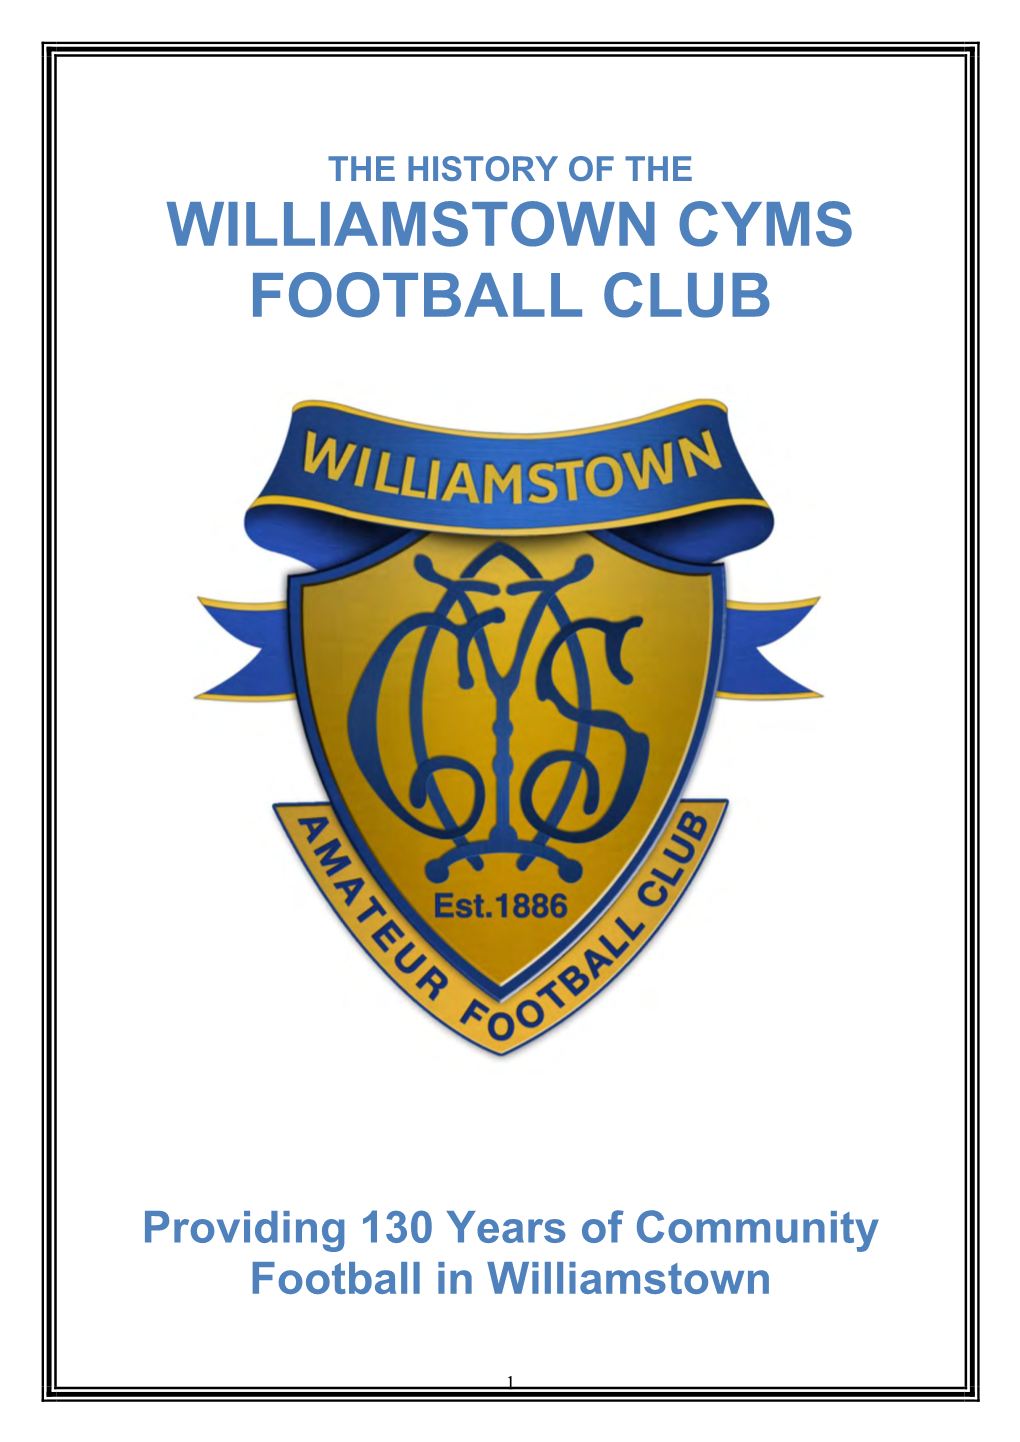 History of Williamstown CYMS Prologue